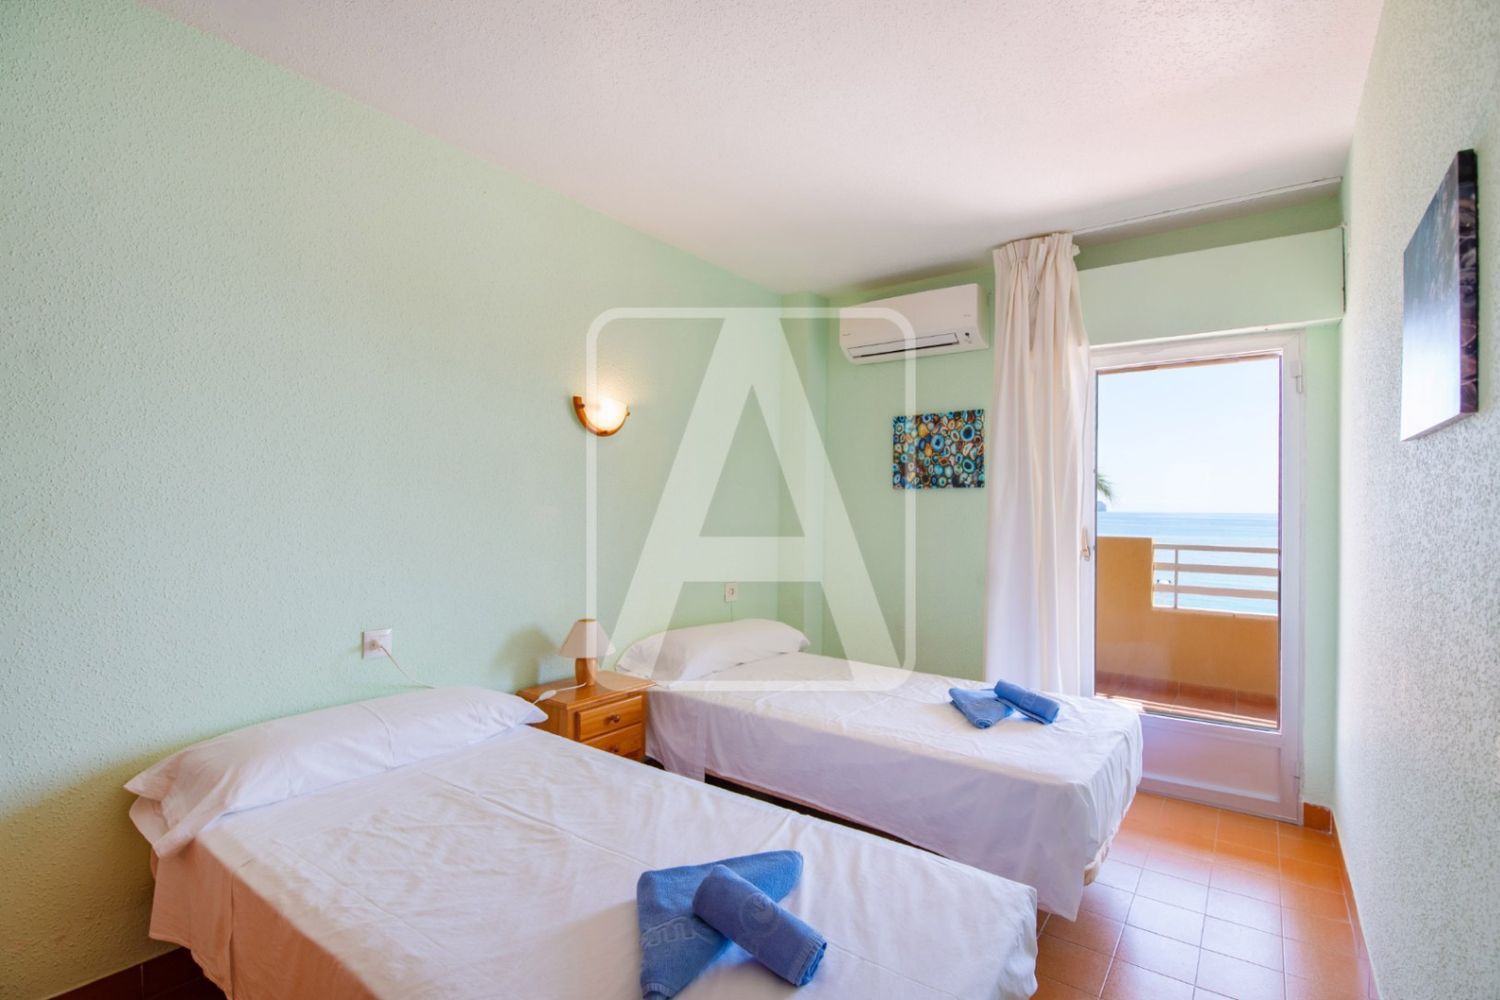 Flat for sale in Calpe